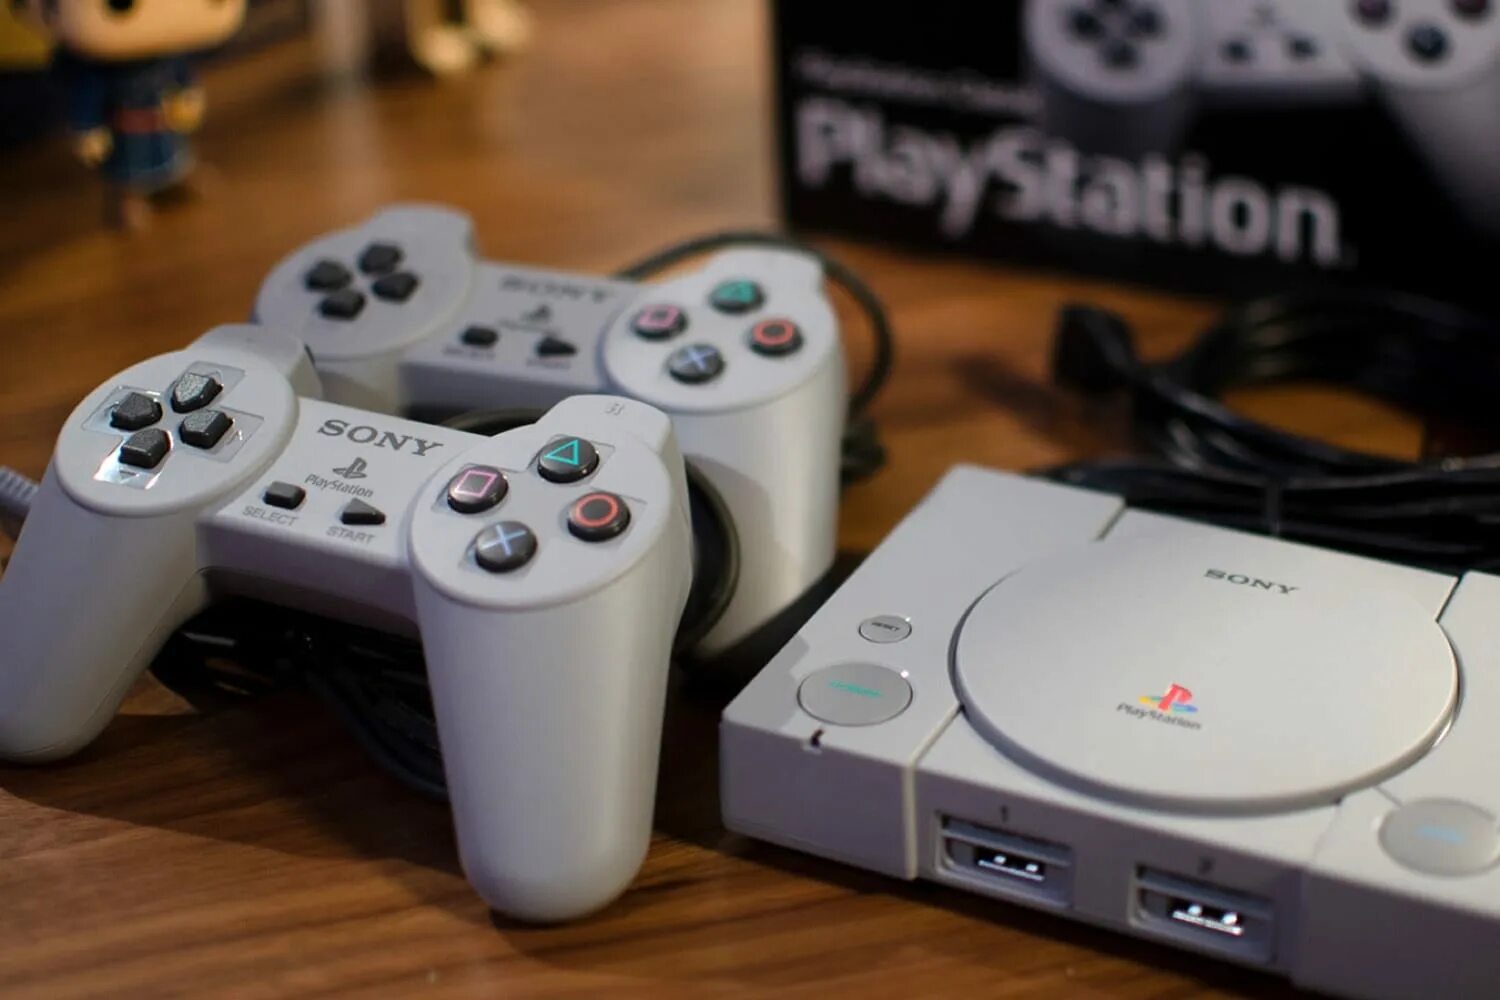 Sony PLAYSTATION 1 Classic. Sony ps1 Classic. Ps1 Classic Mini. PLAYSTATION 1 Classic Mini.